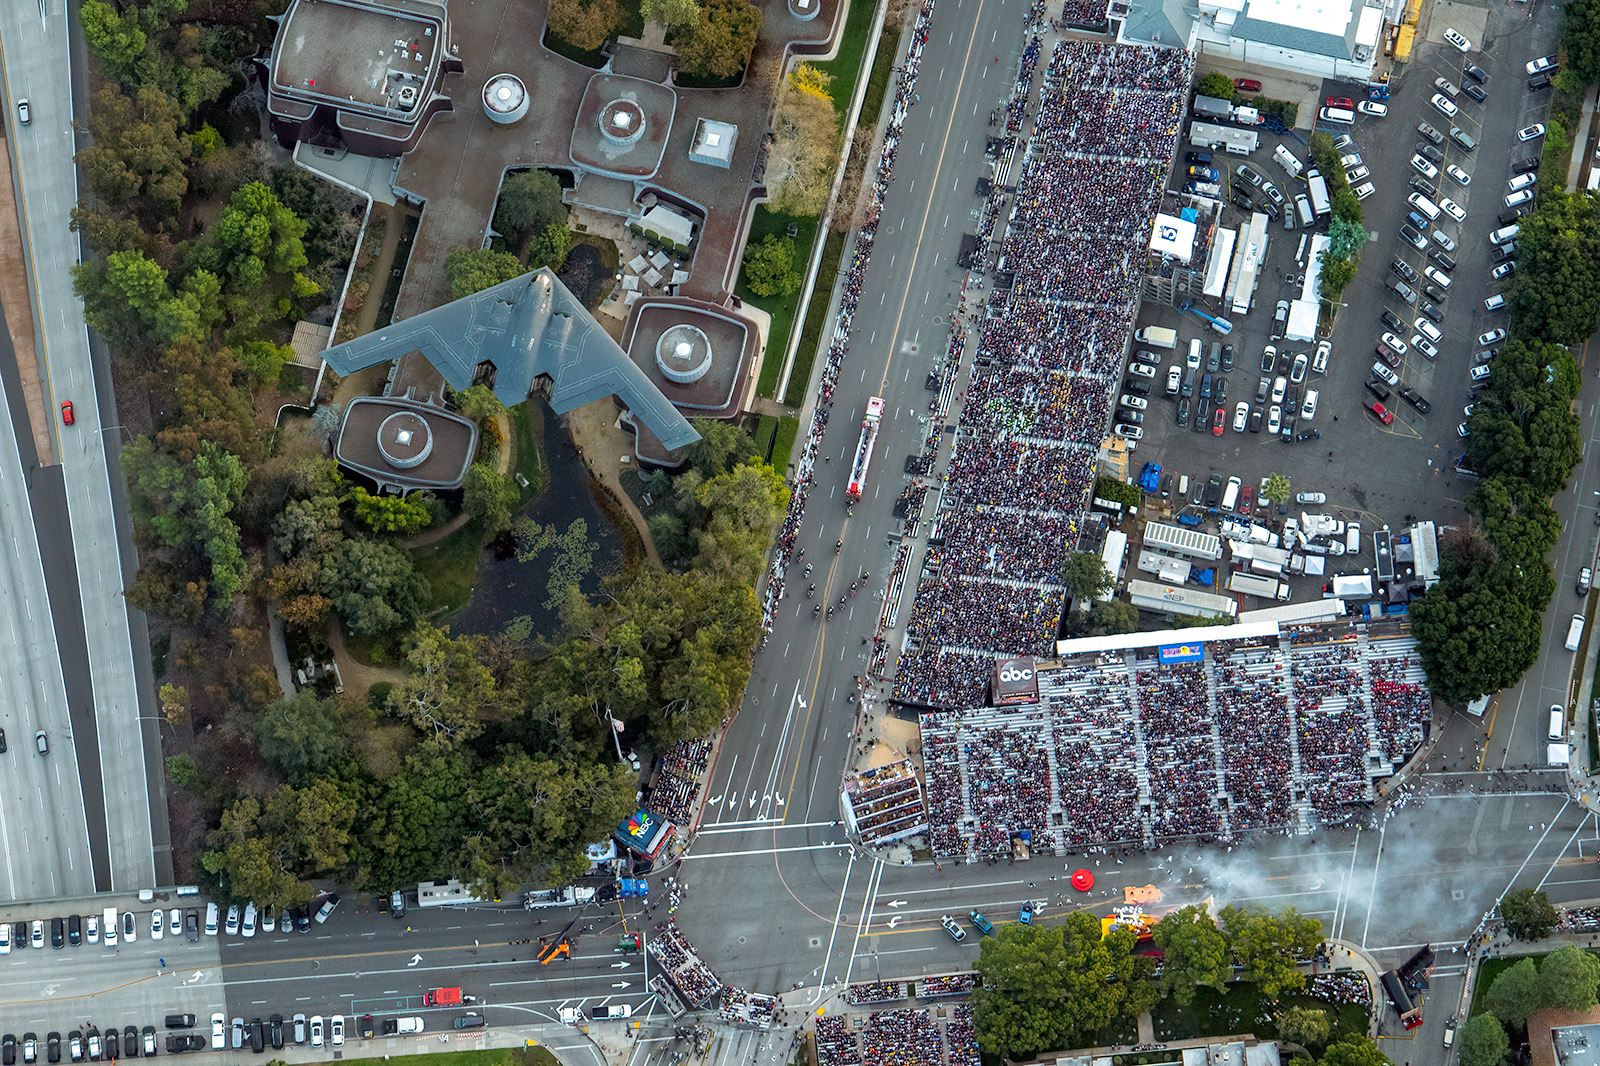 PHOTOS How an Aerial Photographer Snapped the B2 Flying Over the Rose